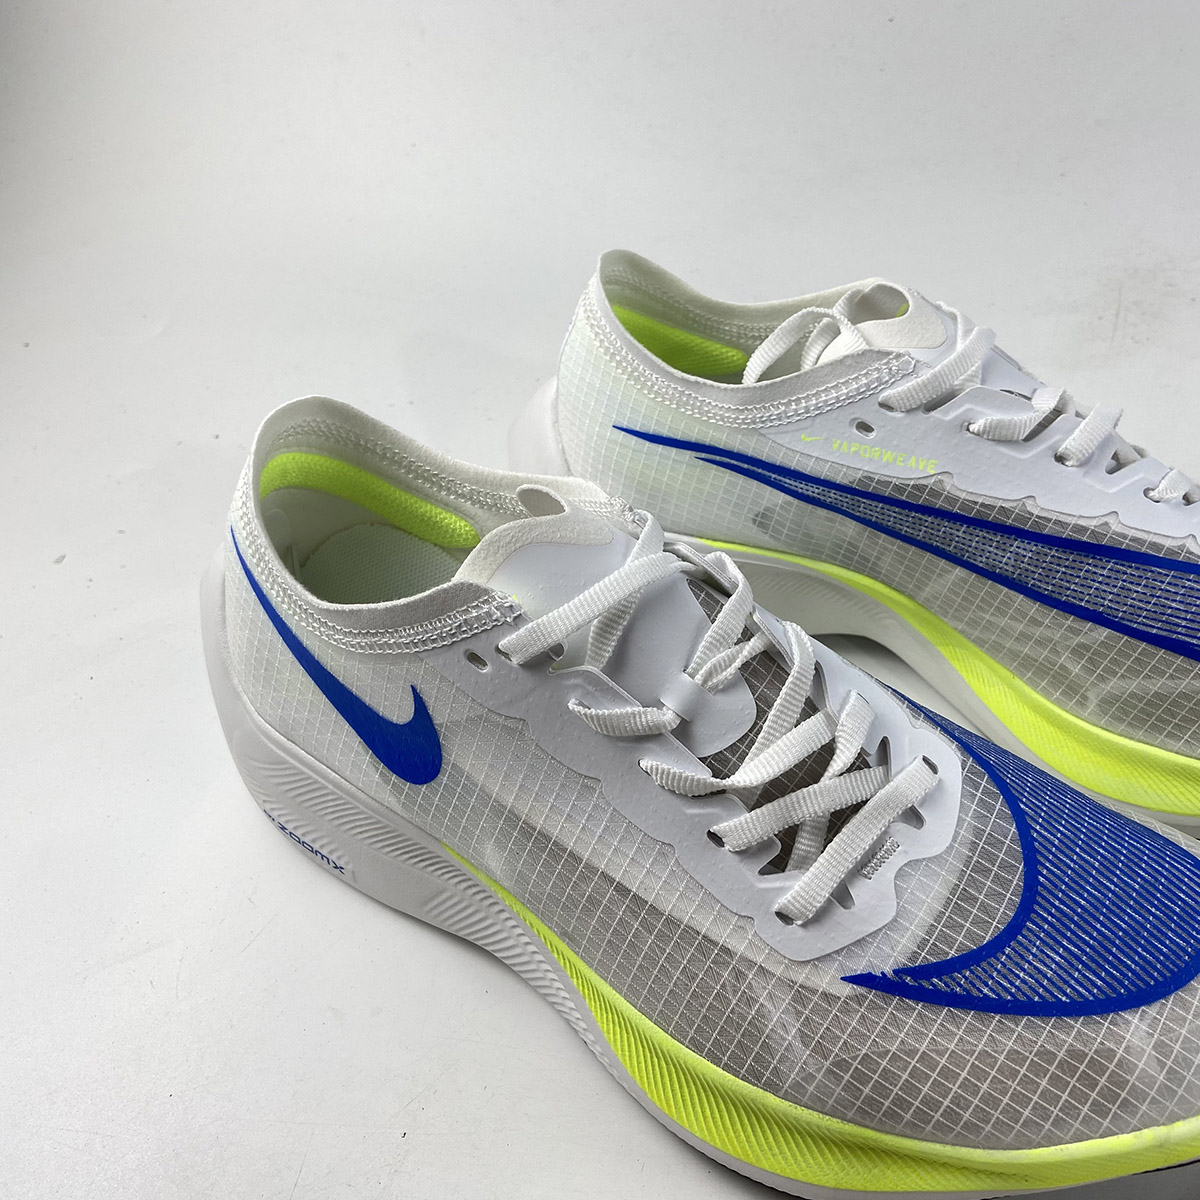 Nike ZoomX VaporFly NEXT% 2 White/Cyber/Black/Racer Blue For Sale – The Sole Line